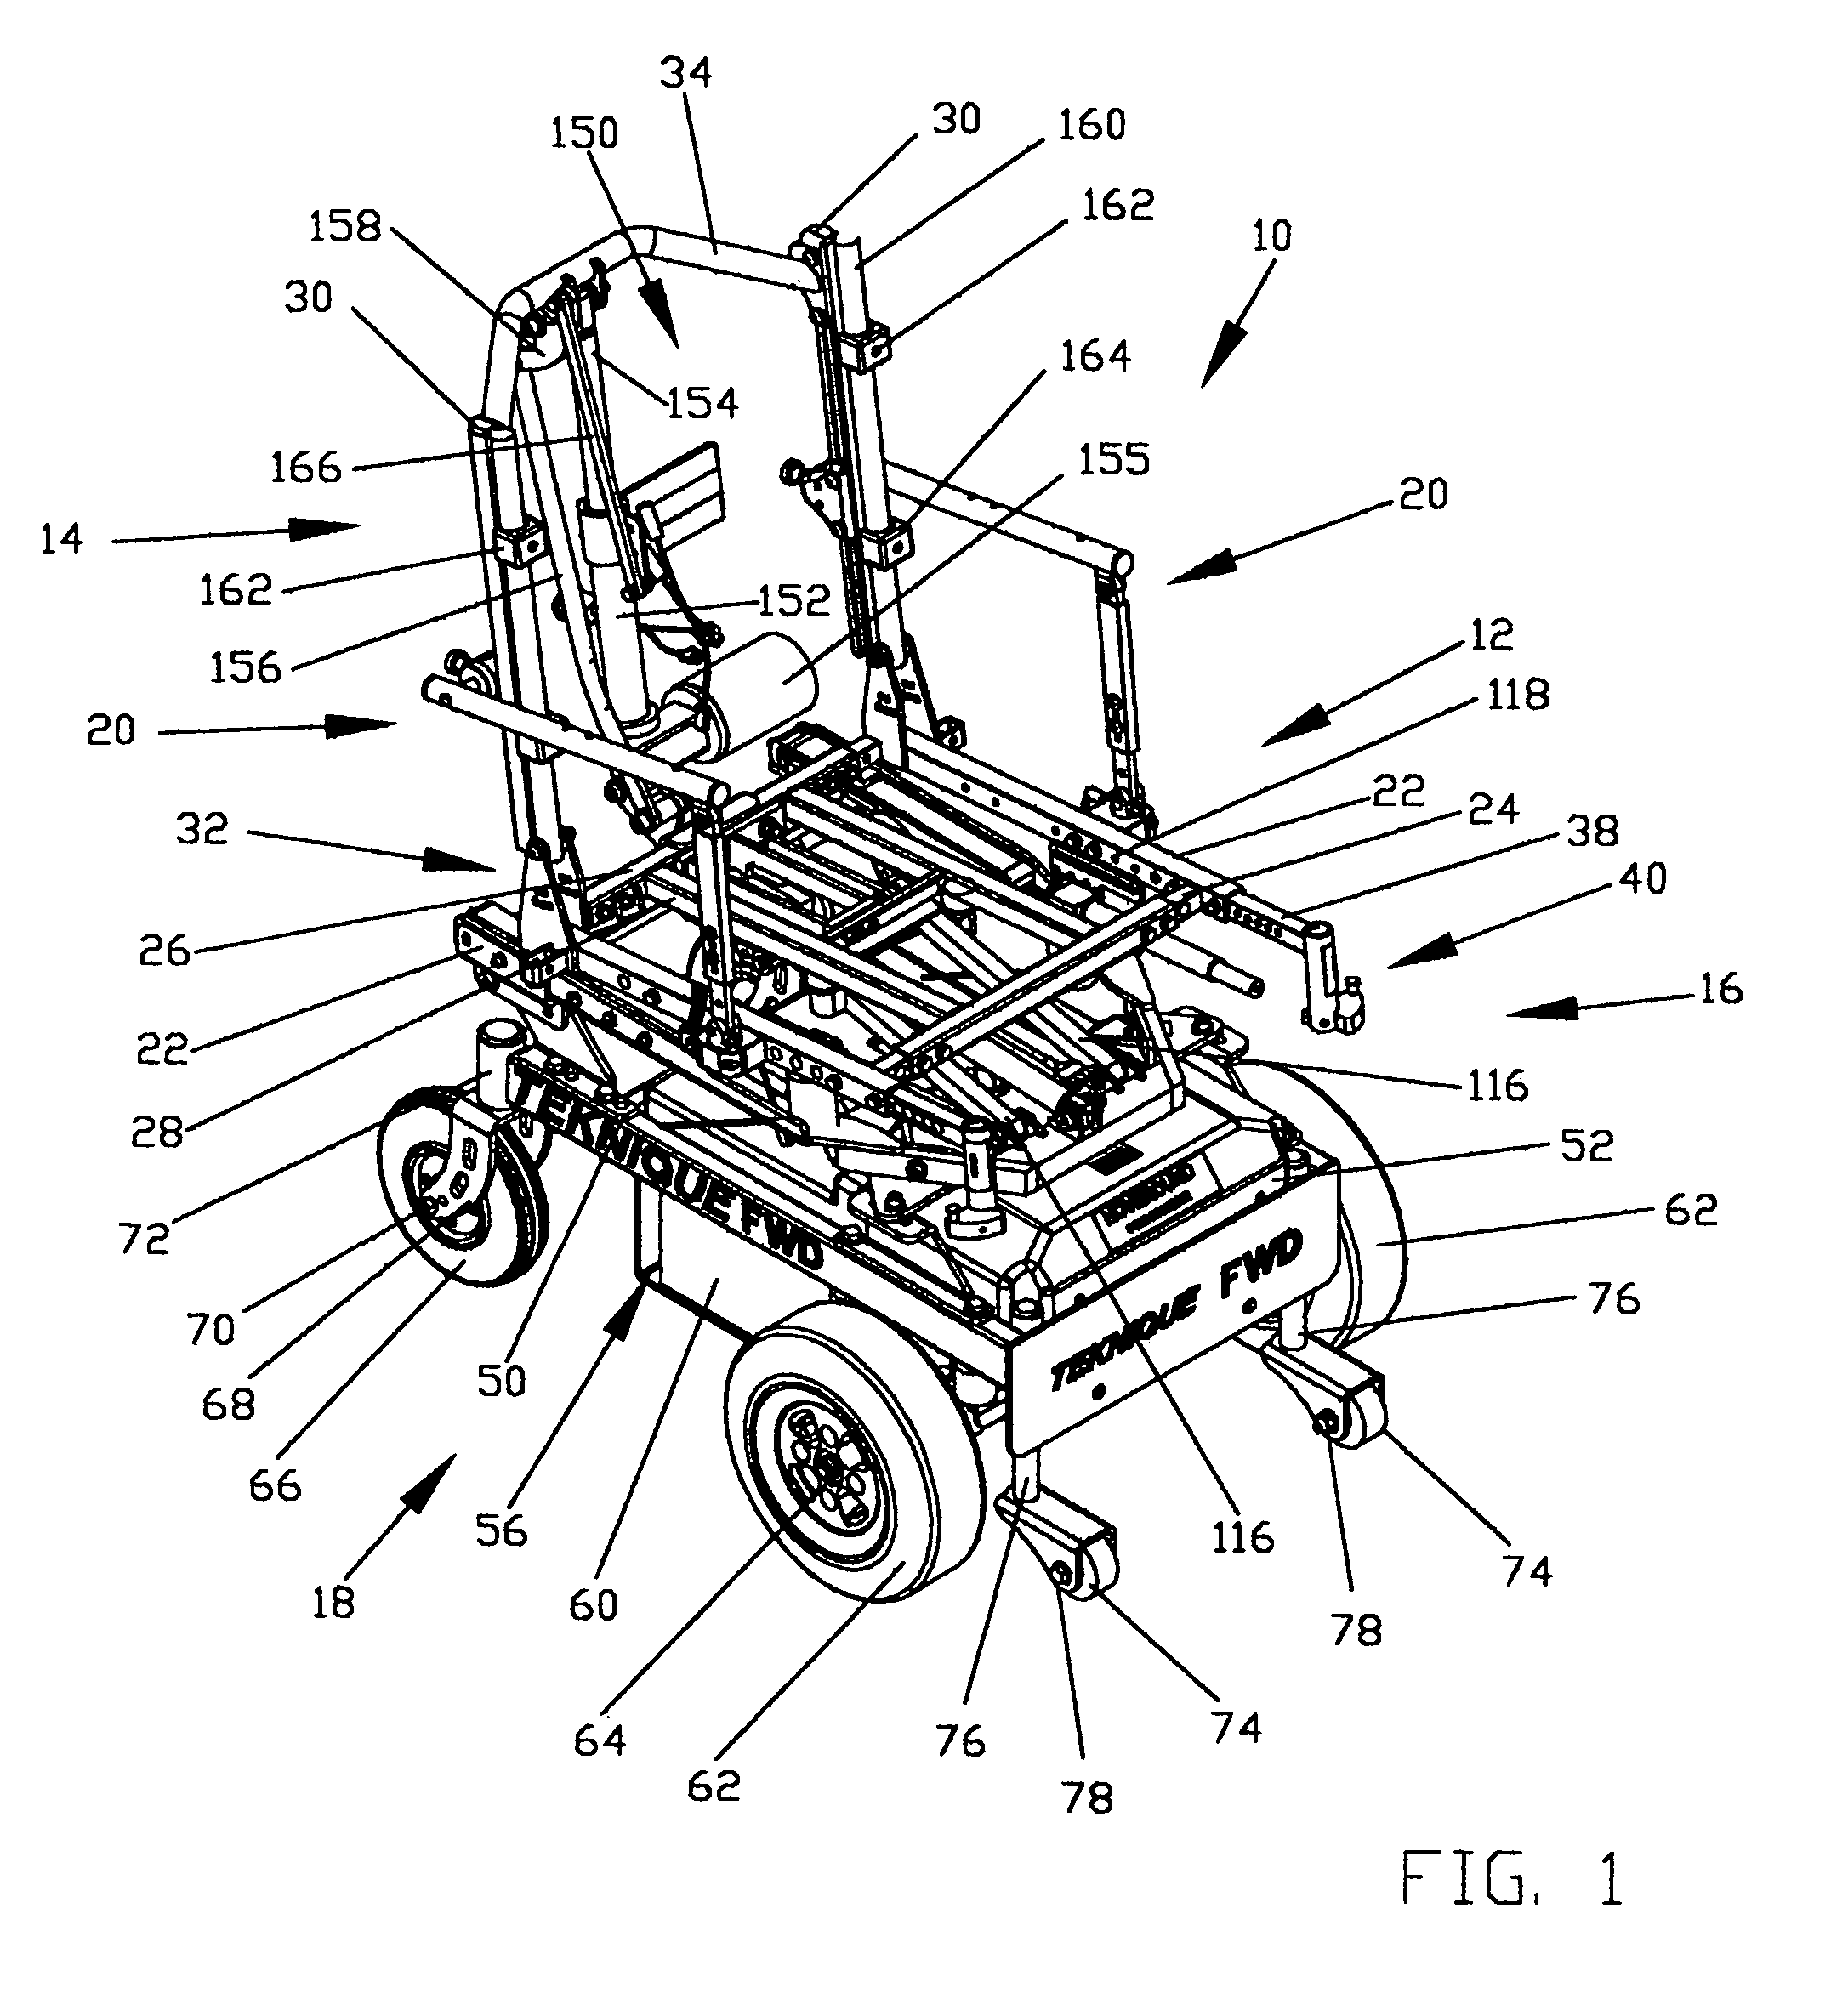 Seat positioning and control system